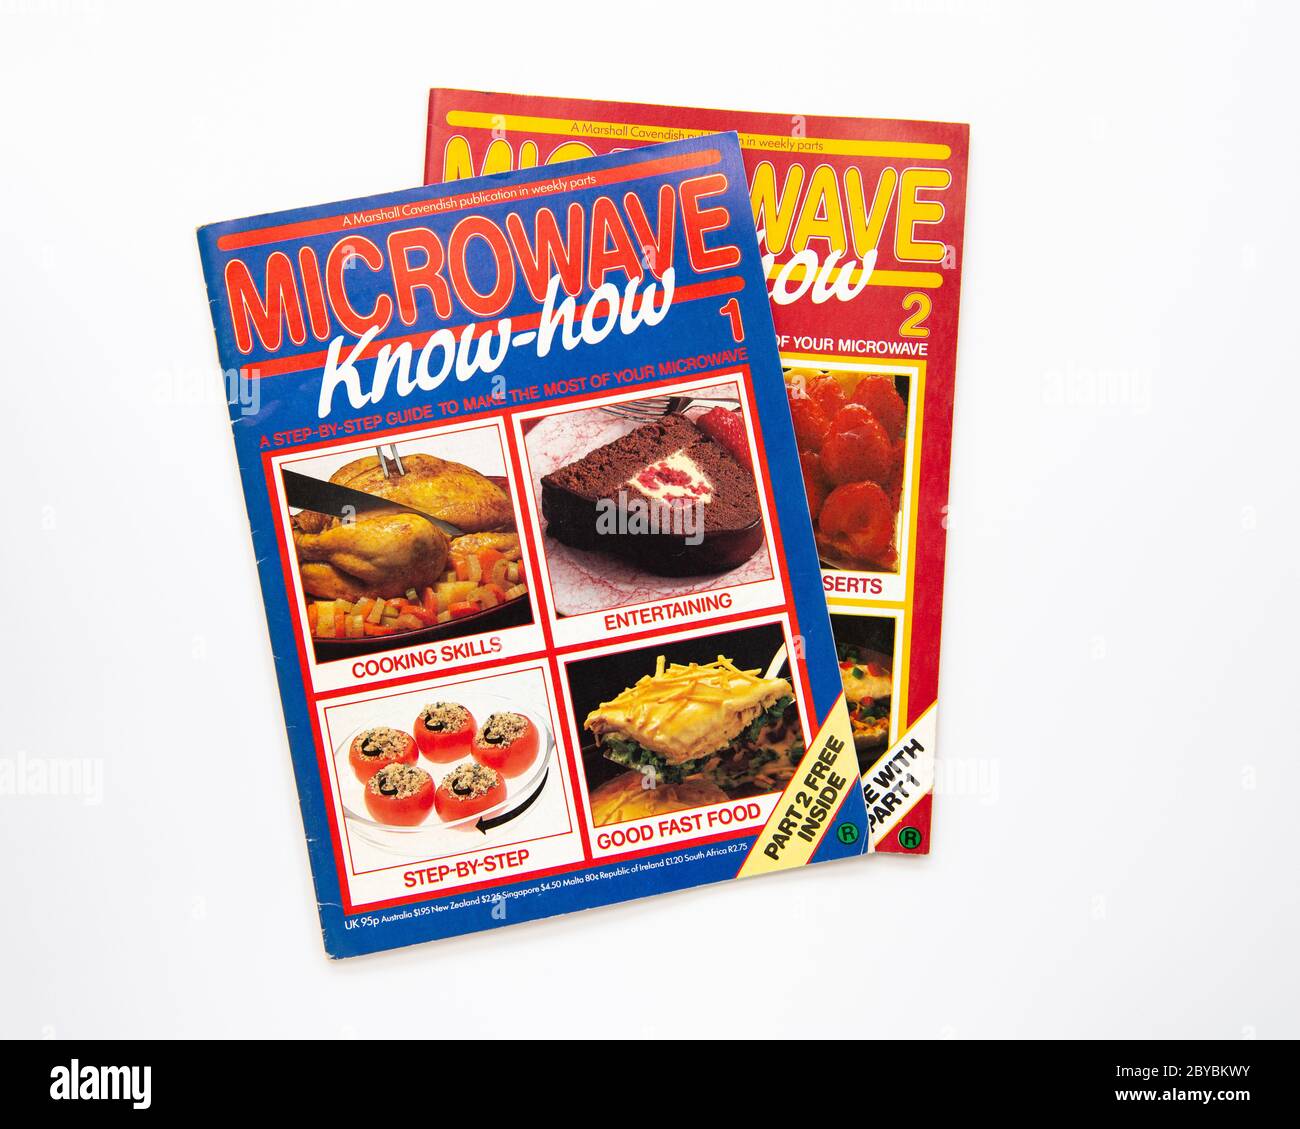 Microwave Know-how - a Marshall cavendish publication in weekly parts (parts 1 and 2) 1985 Stock Photo